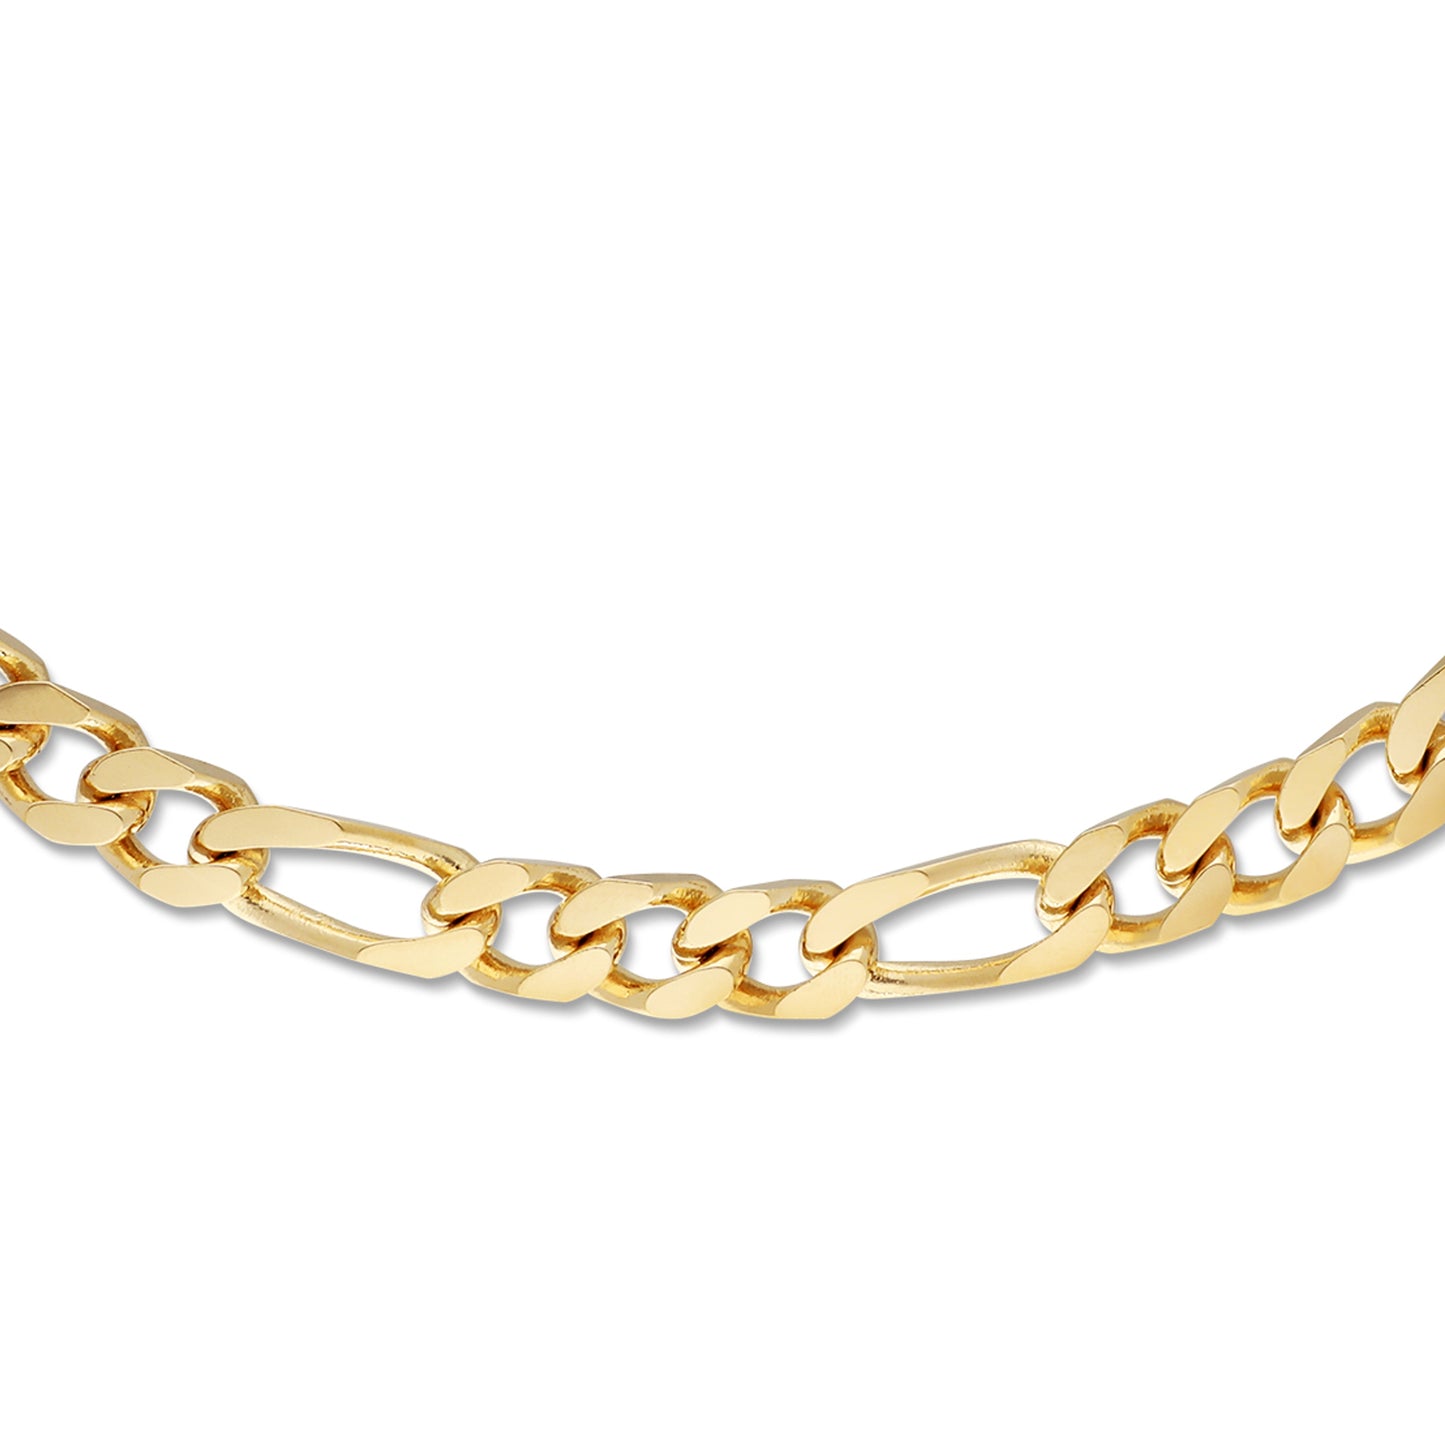 Bronzoro 36" Yellow Scrolled Link Necklace